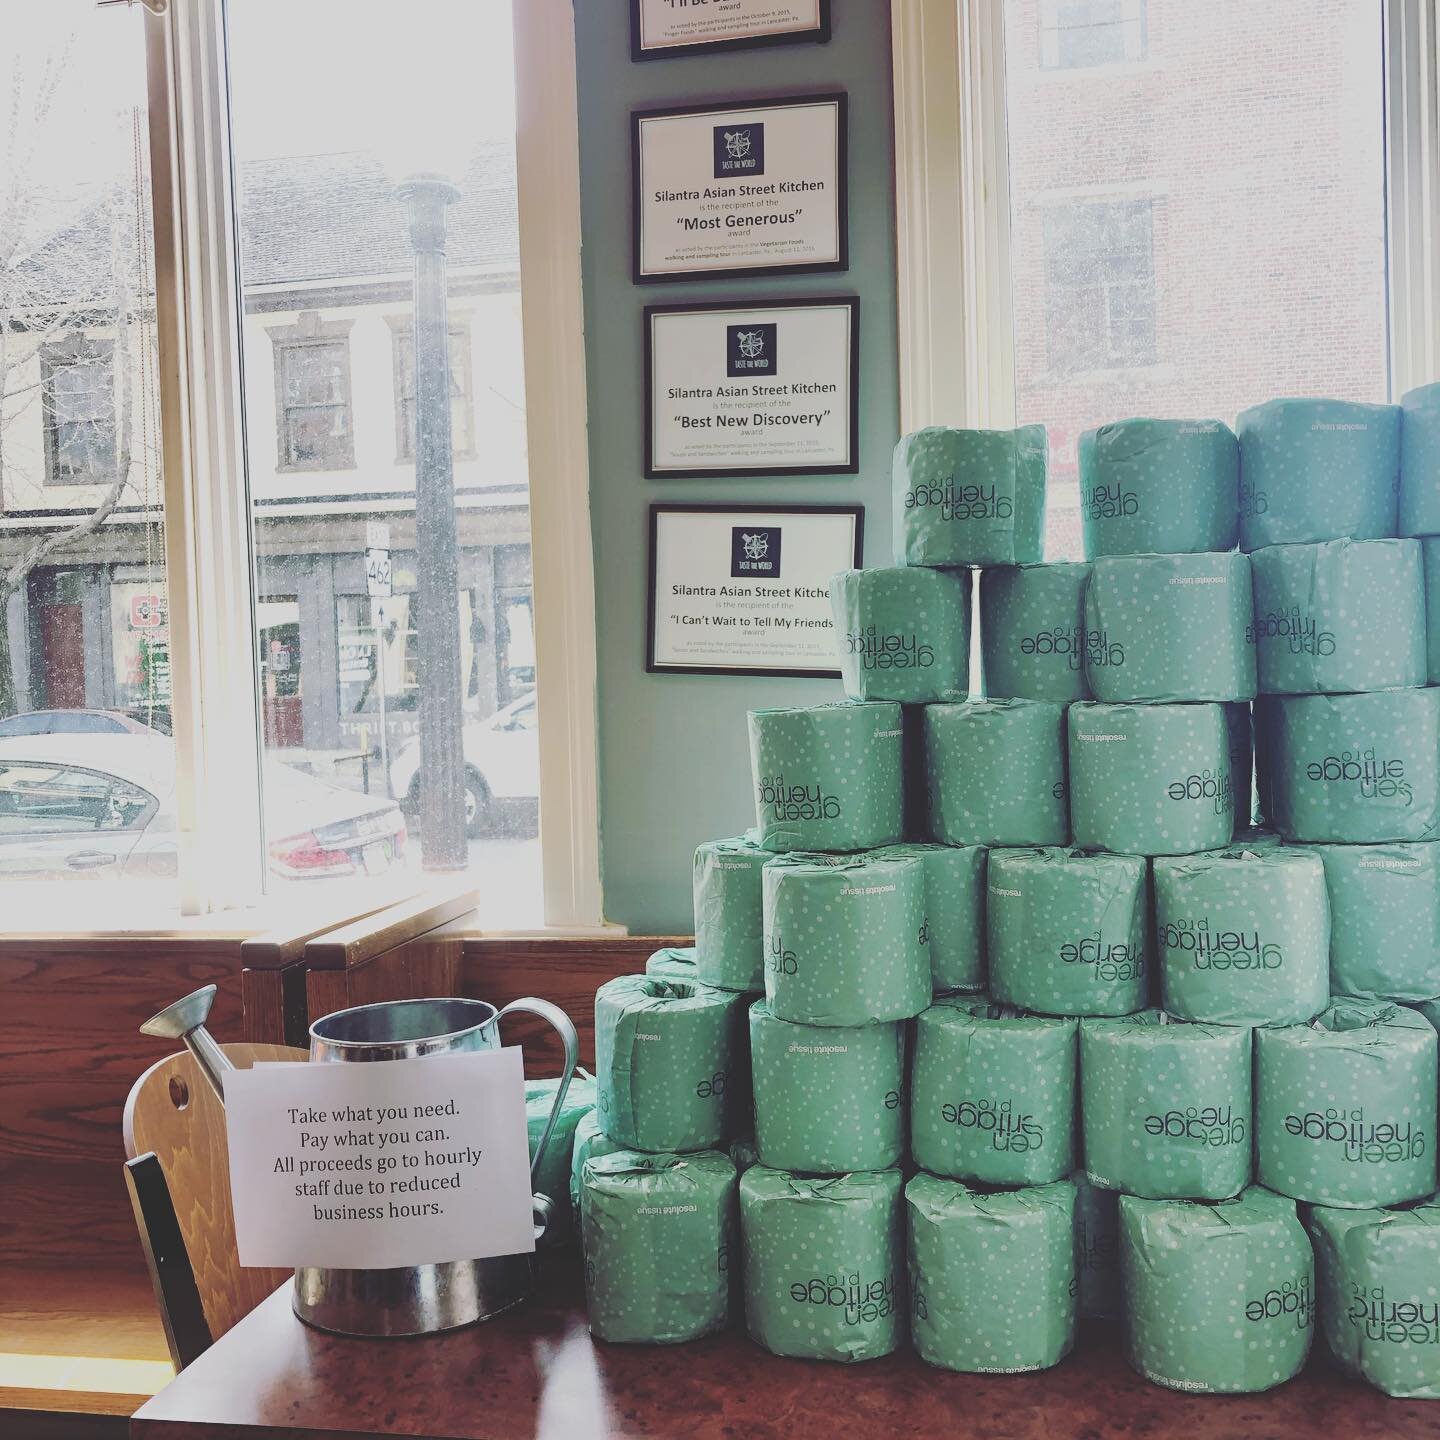 Our homies at @silantraco leading the way. This is what small business entrepreneurialism looks like in action. #lancasterpa #smallbiz #toiletpapercrisis